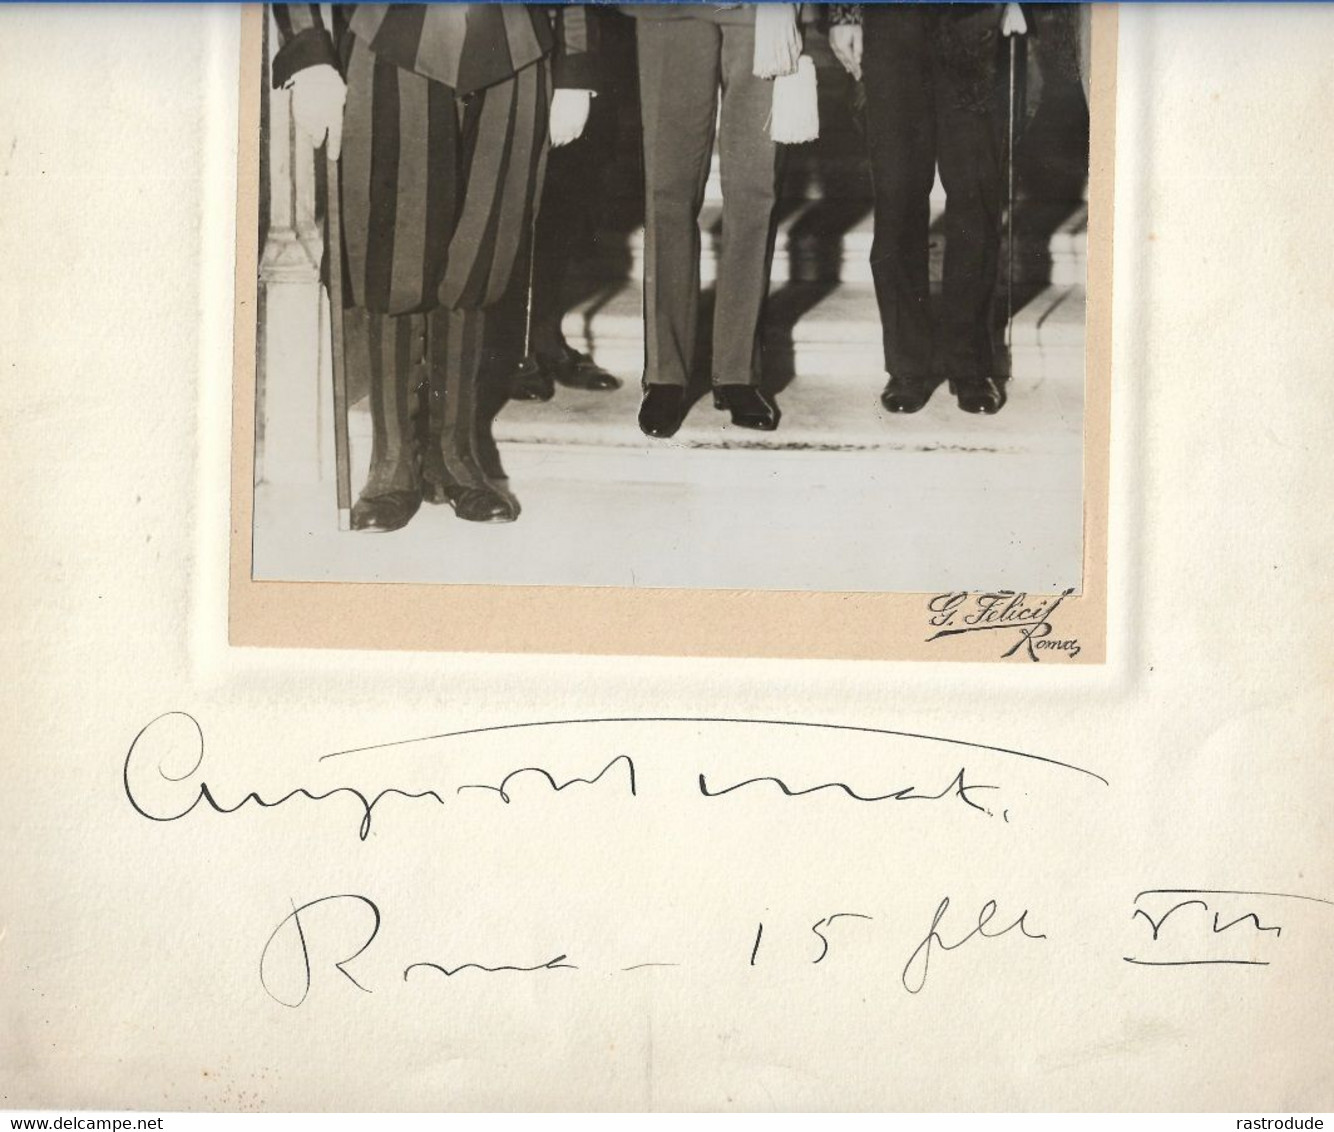 1930s ORIGINAL PHOTOGRAPH Of AUGUSTO TURATI In The VATICAN W. SWISS GUARD By GIUSEPPE FELICI - SIGNED - Dédicacées